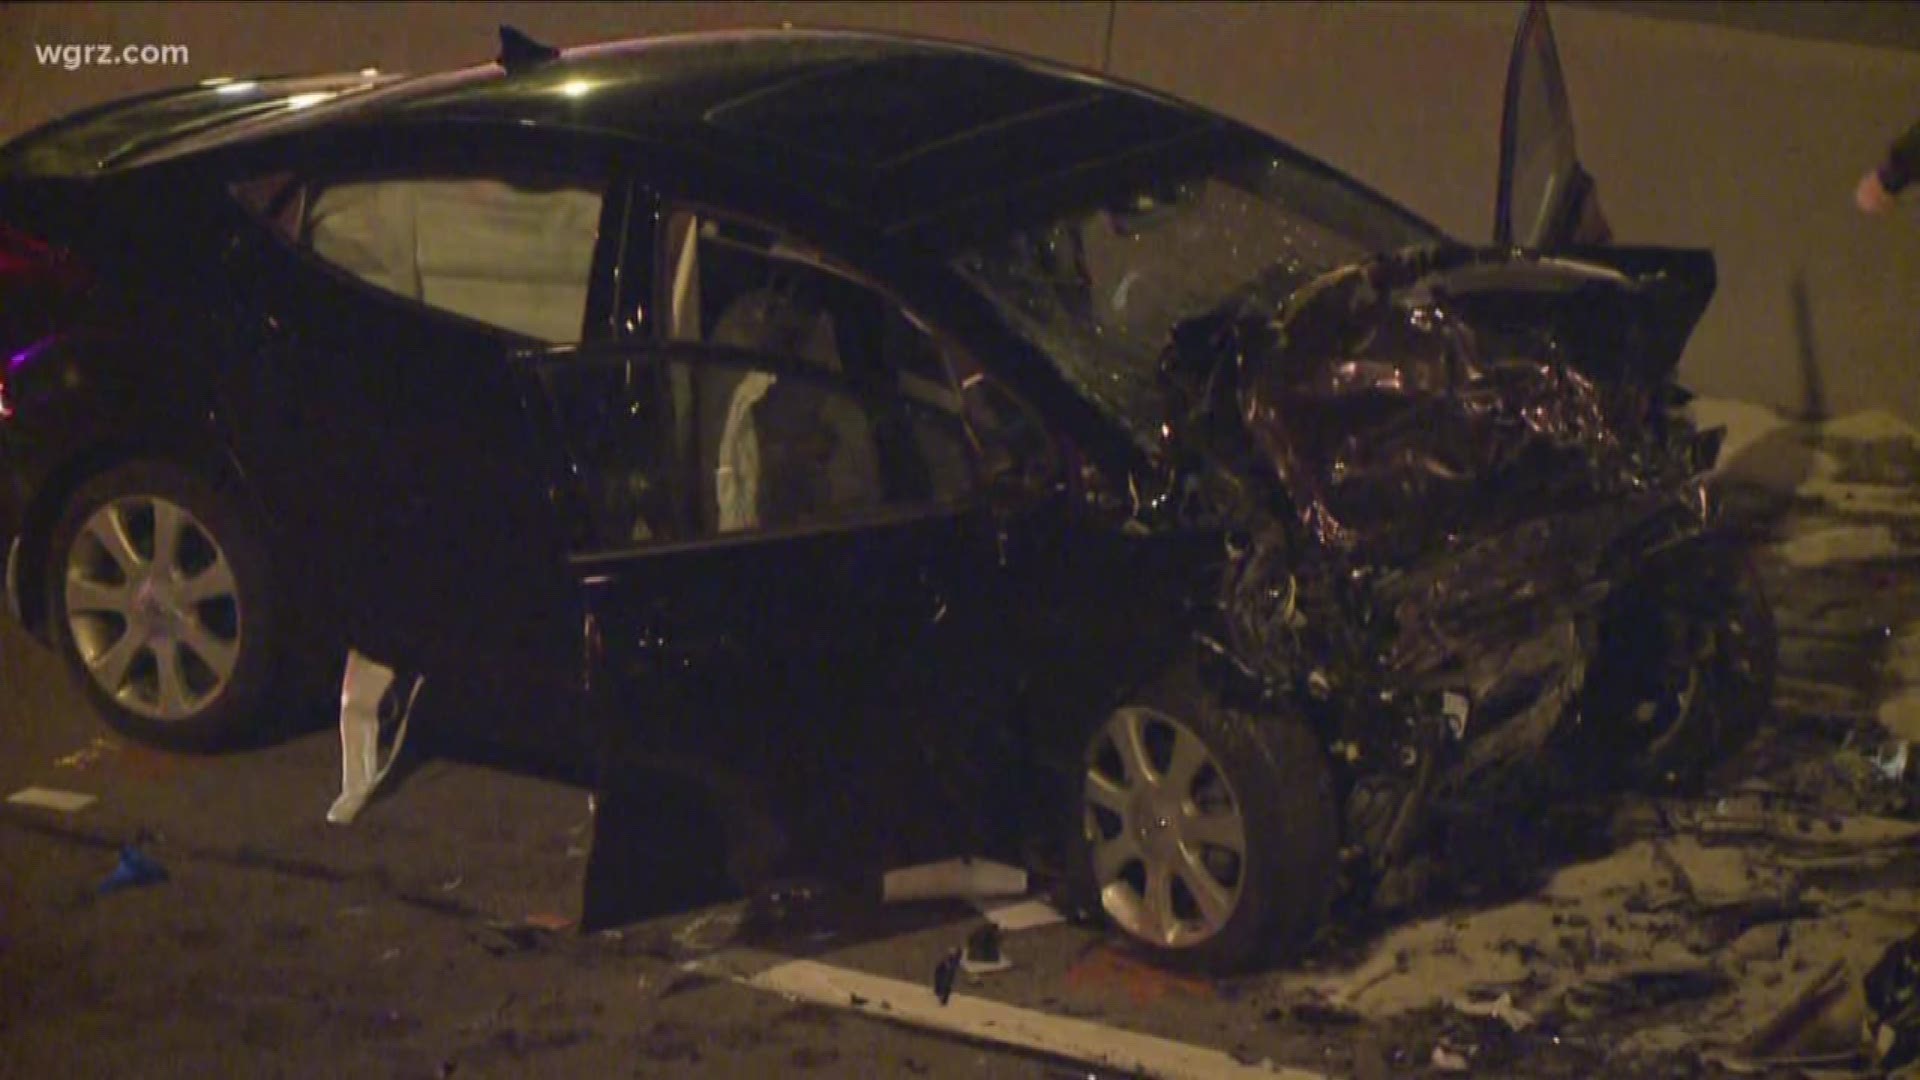 Two people were taken to ECMC following a head-on crash on the inbound 33 Monday night.